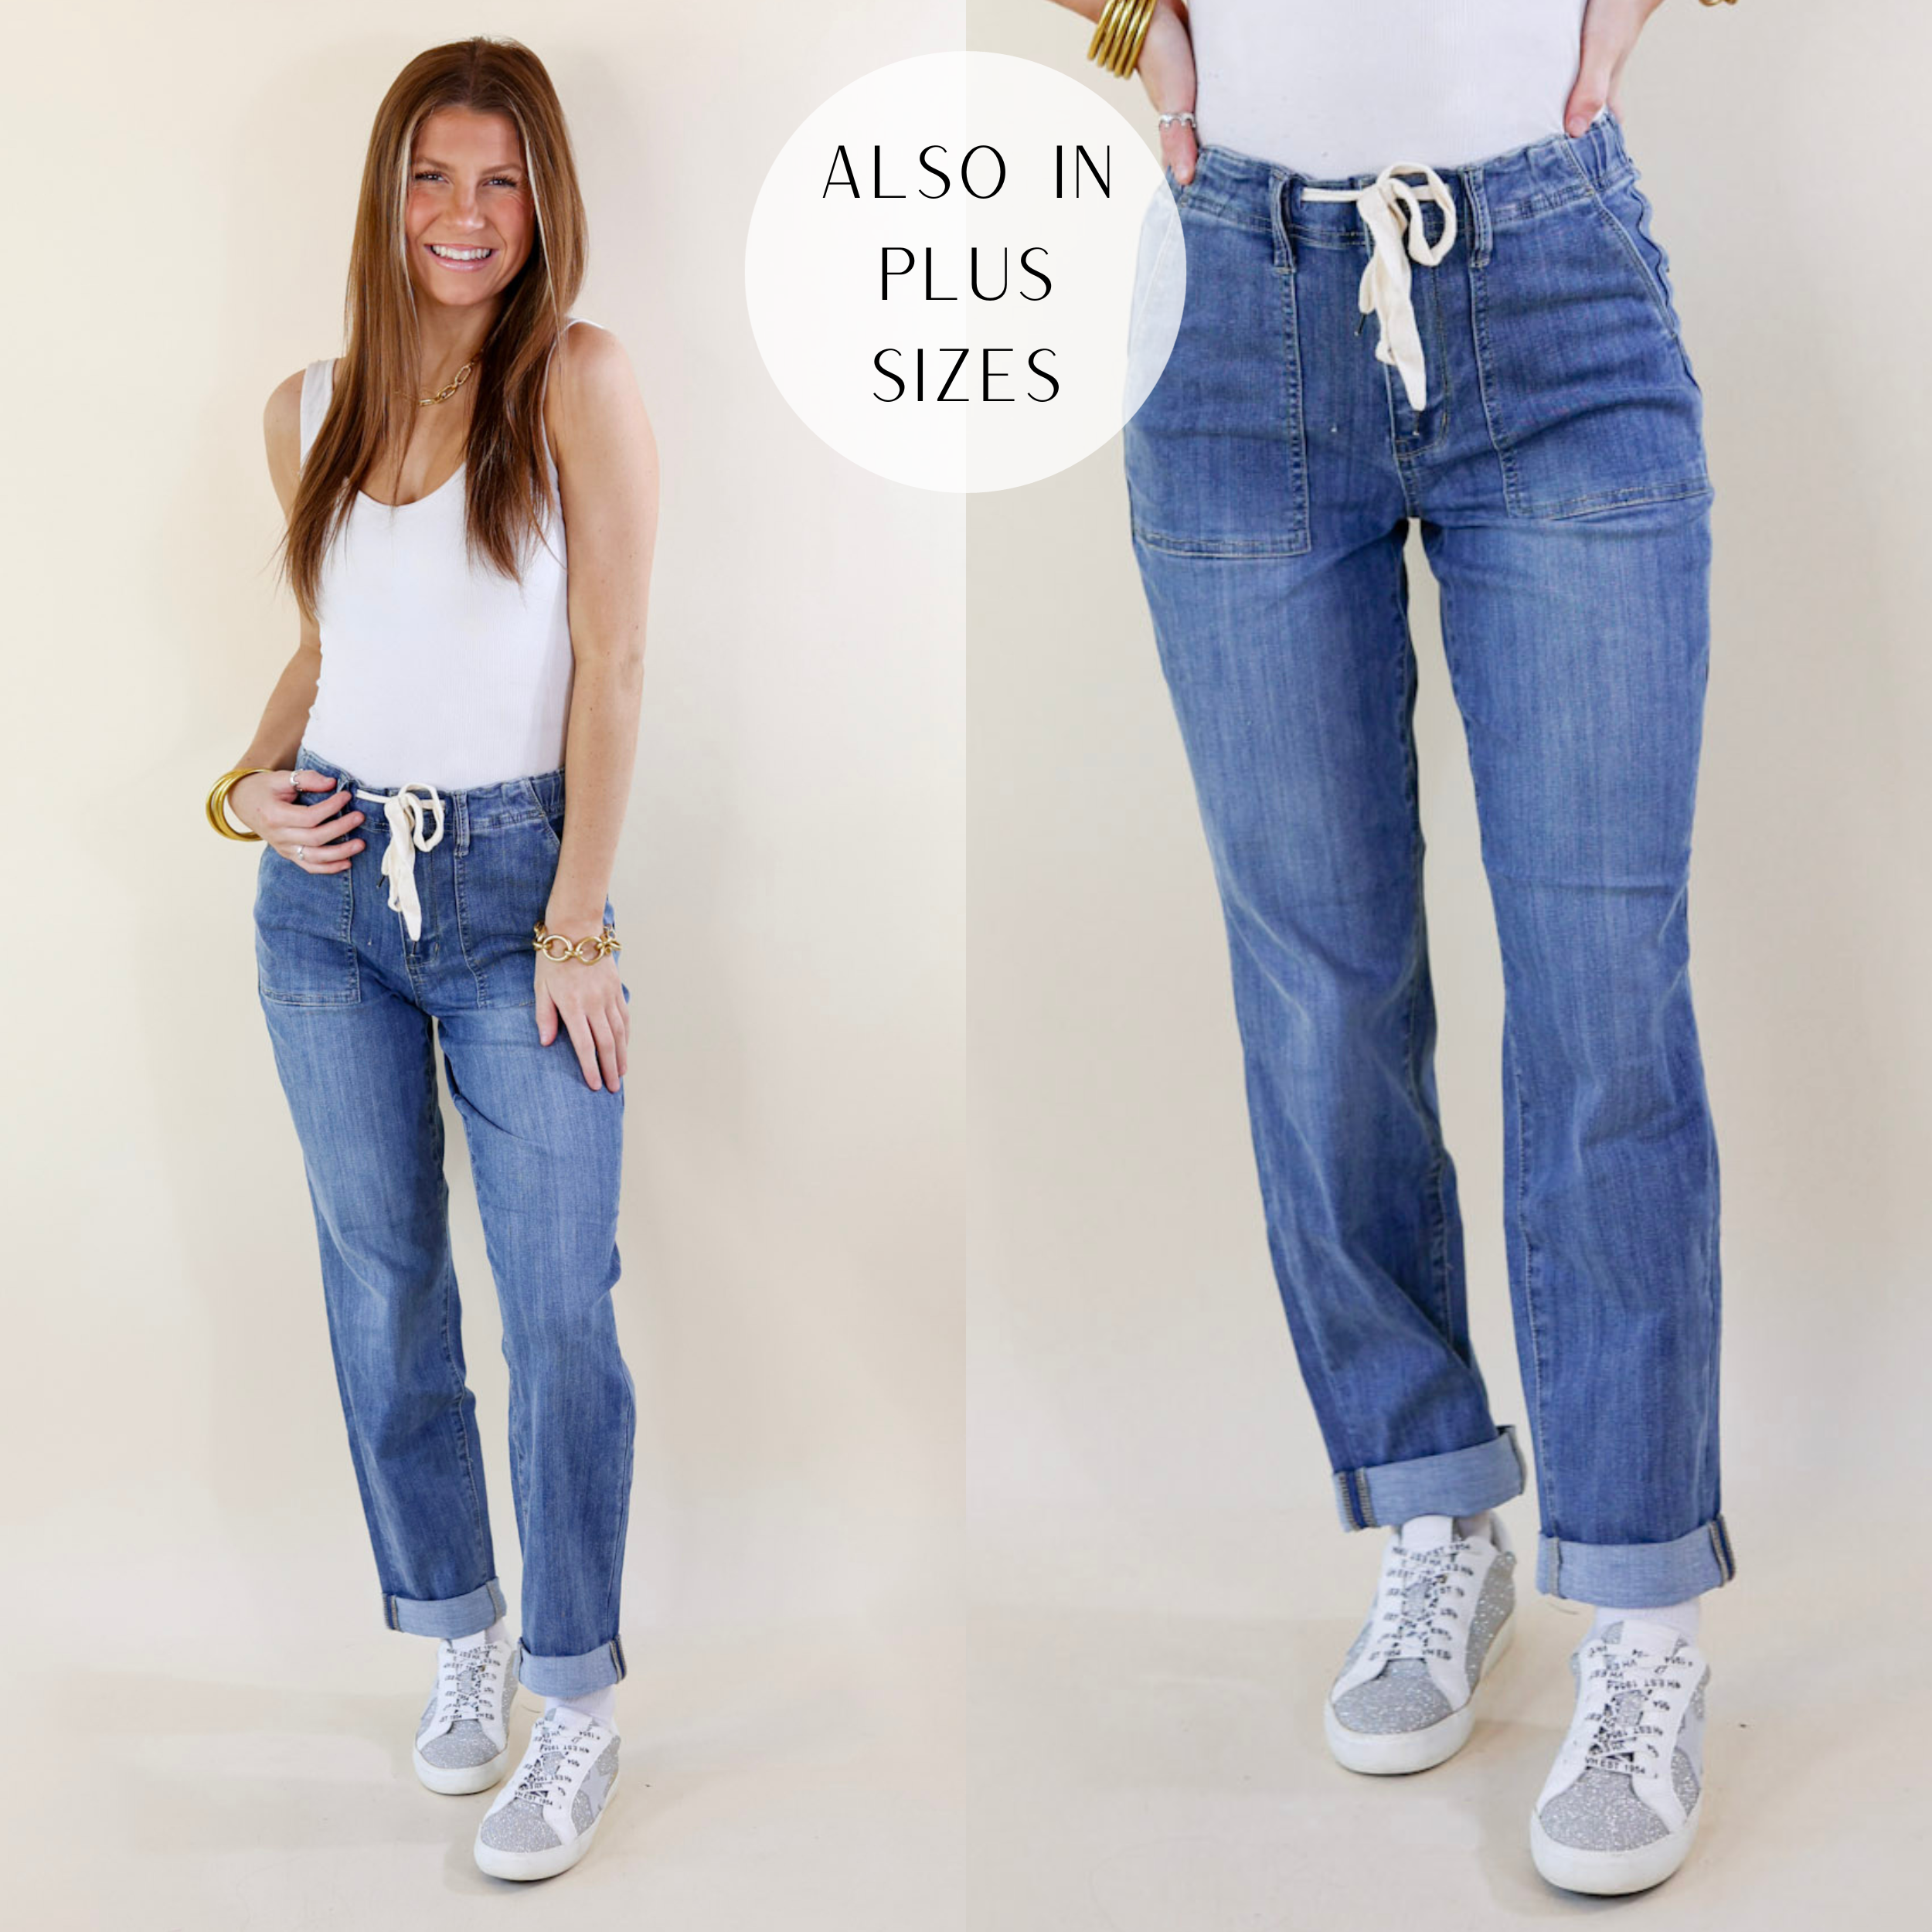 Judy Blue | Keep It A Secret Relaxed Pull on Jean Joggers with Cuffed Hem in Medium Wash - Giddy Up Glamour Boutique